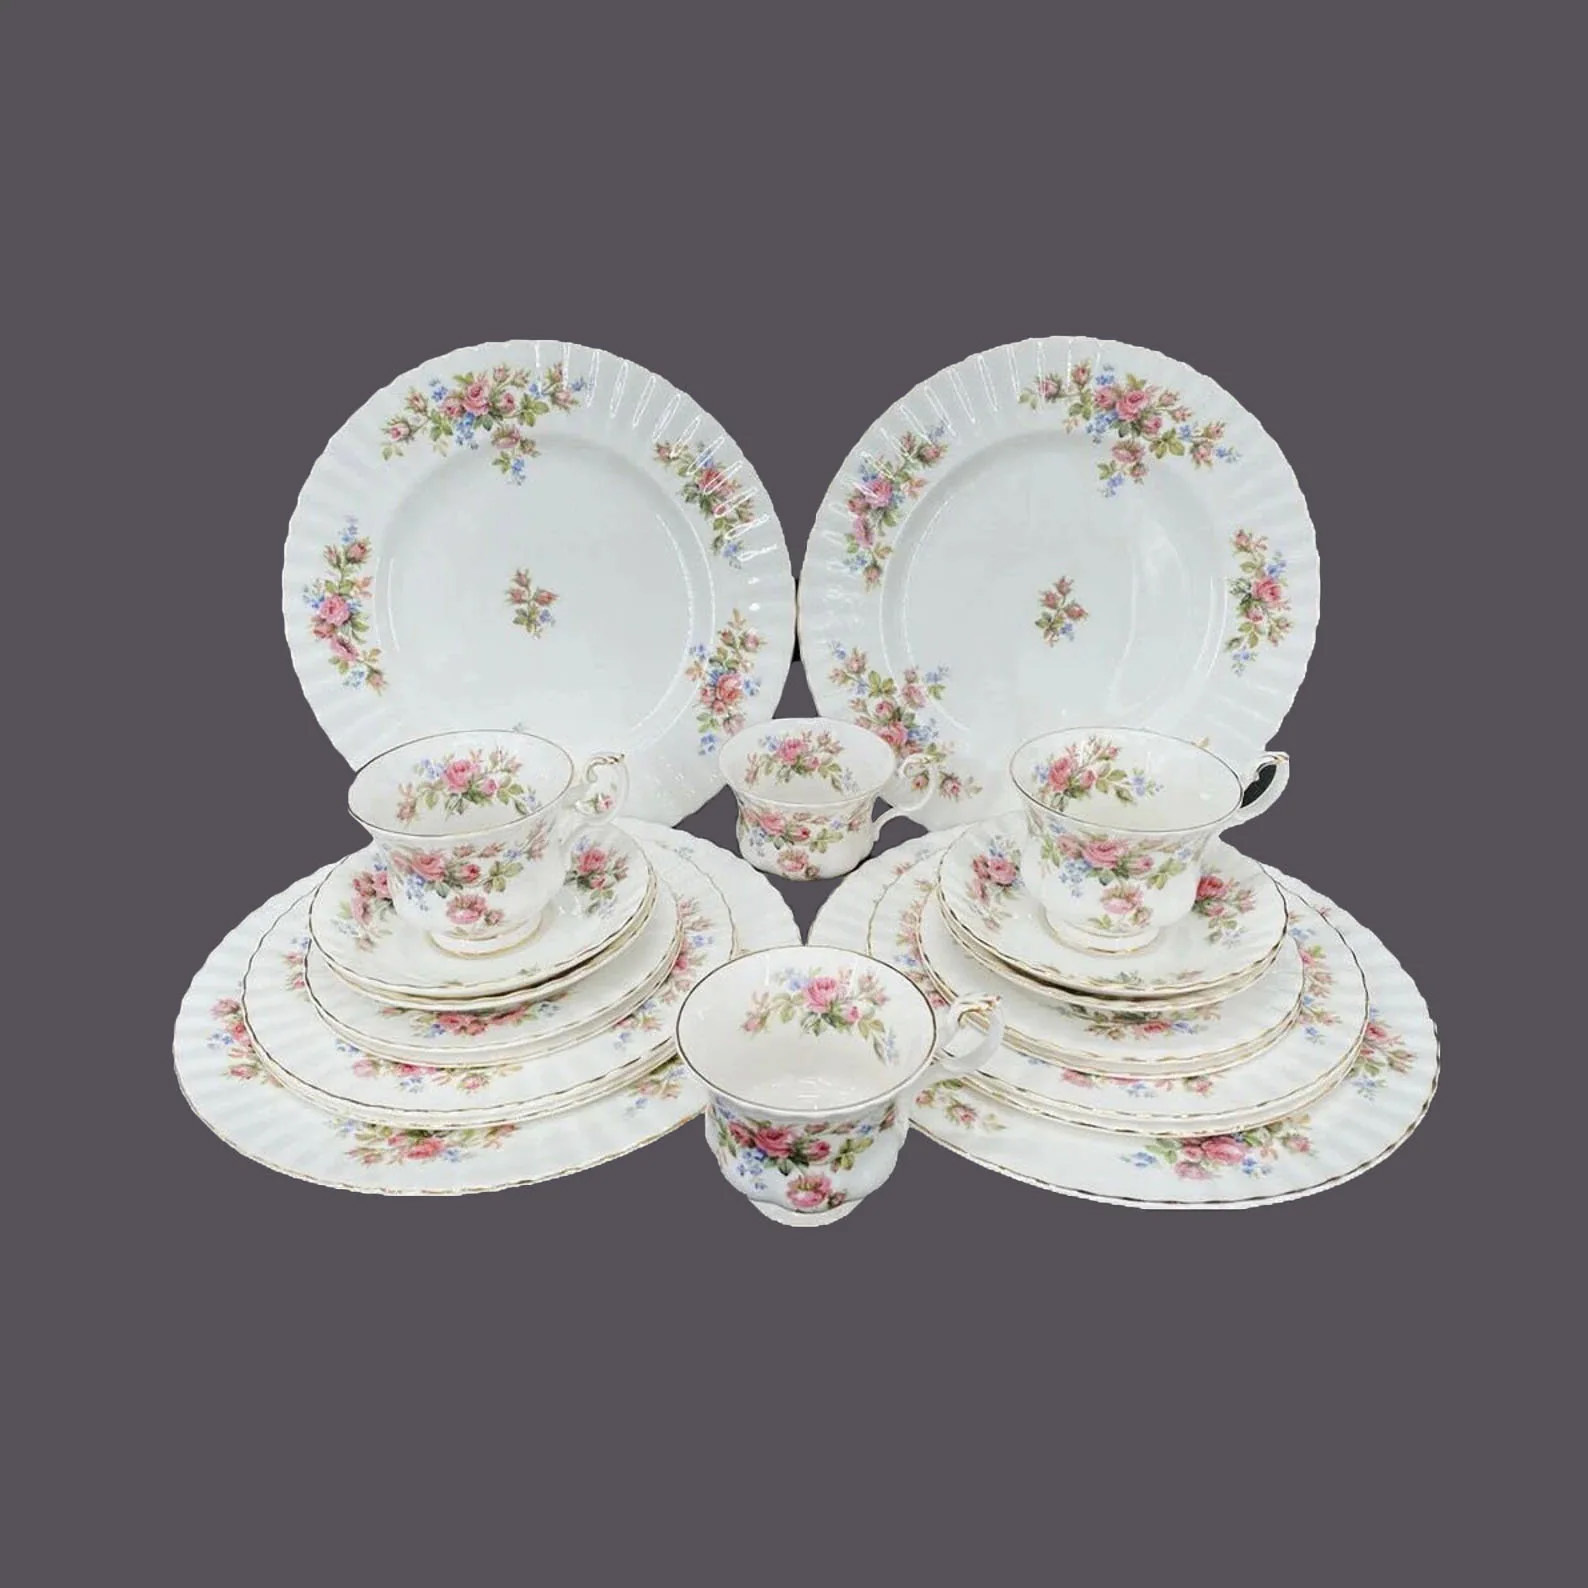 Royal Albert Moss Rose bone china tableware. Forty-one pieces made in England. - $411.18